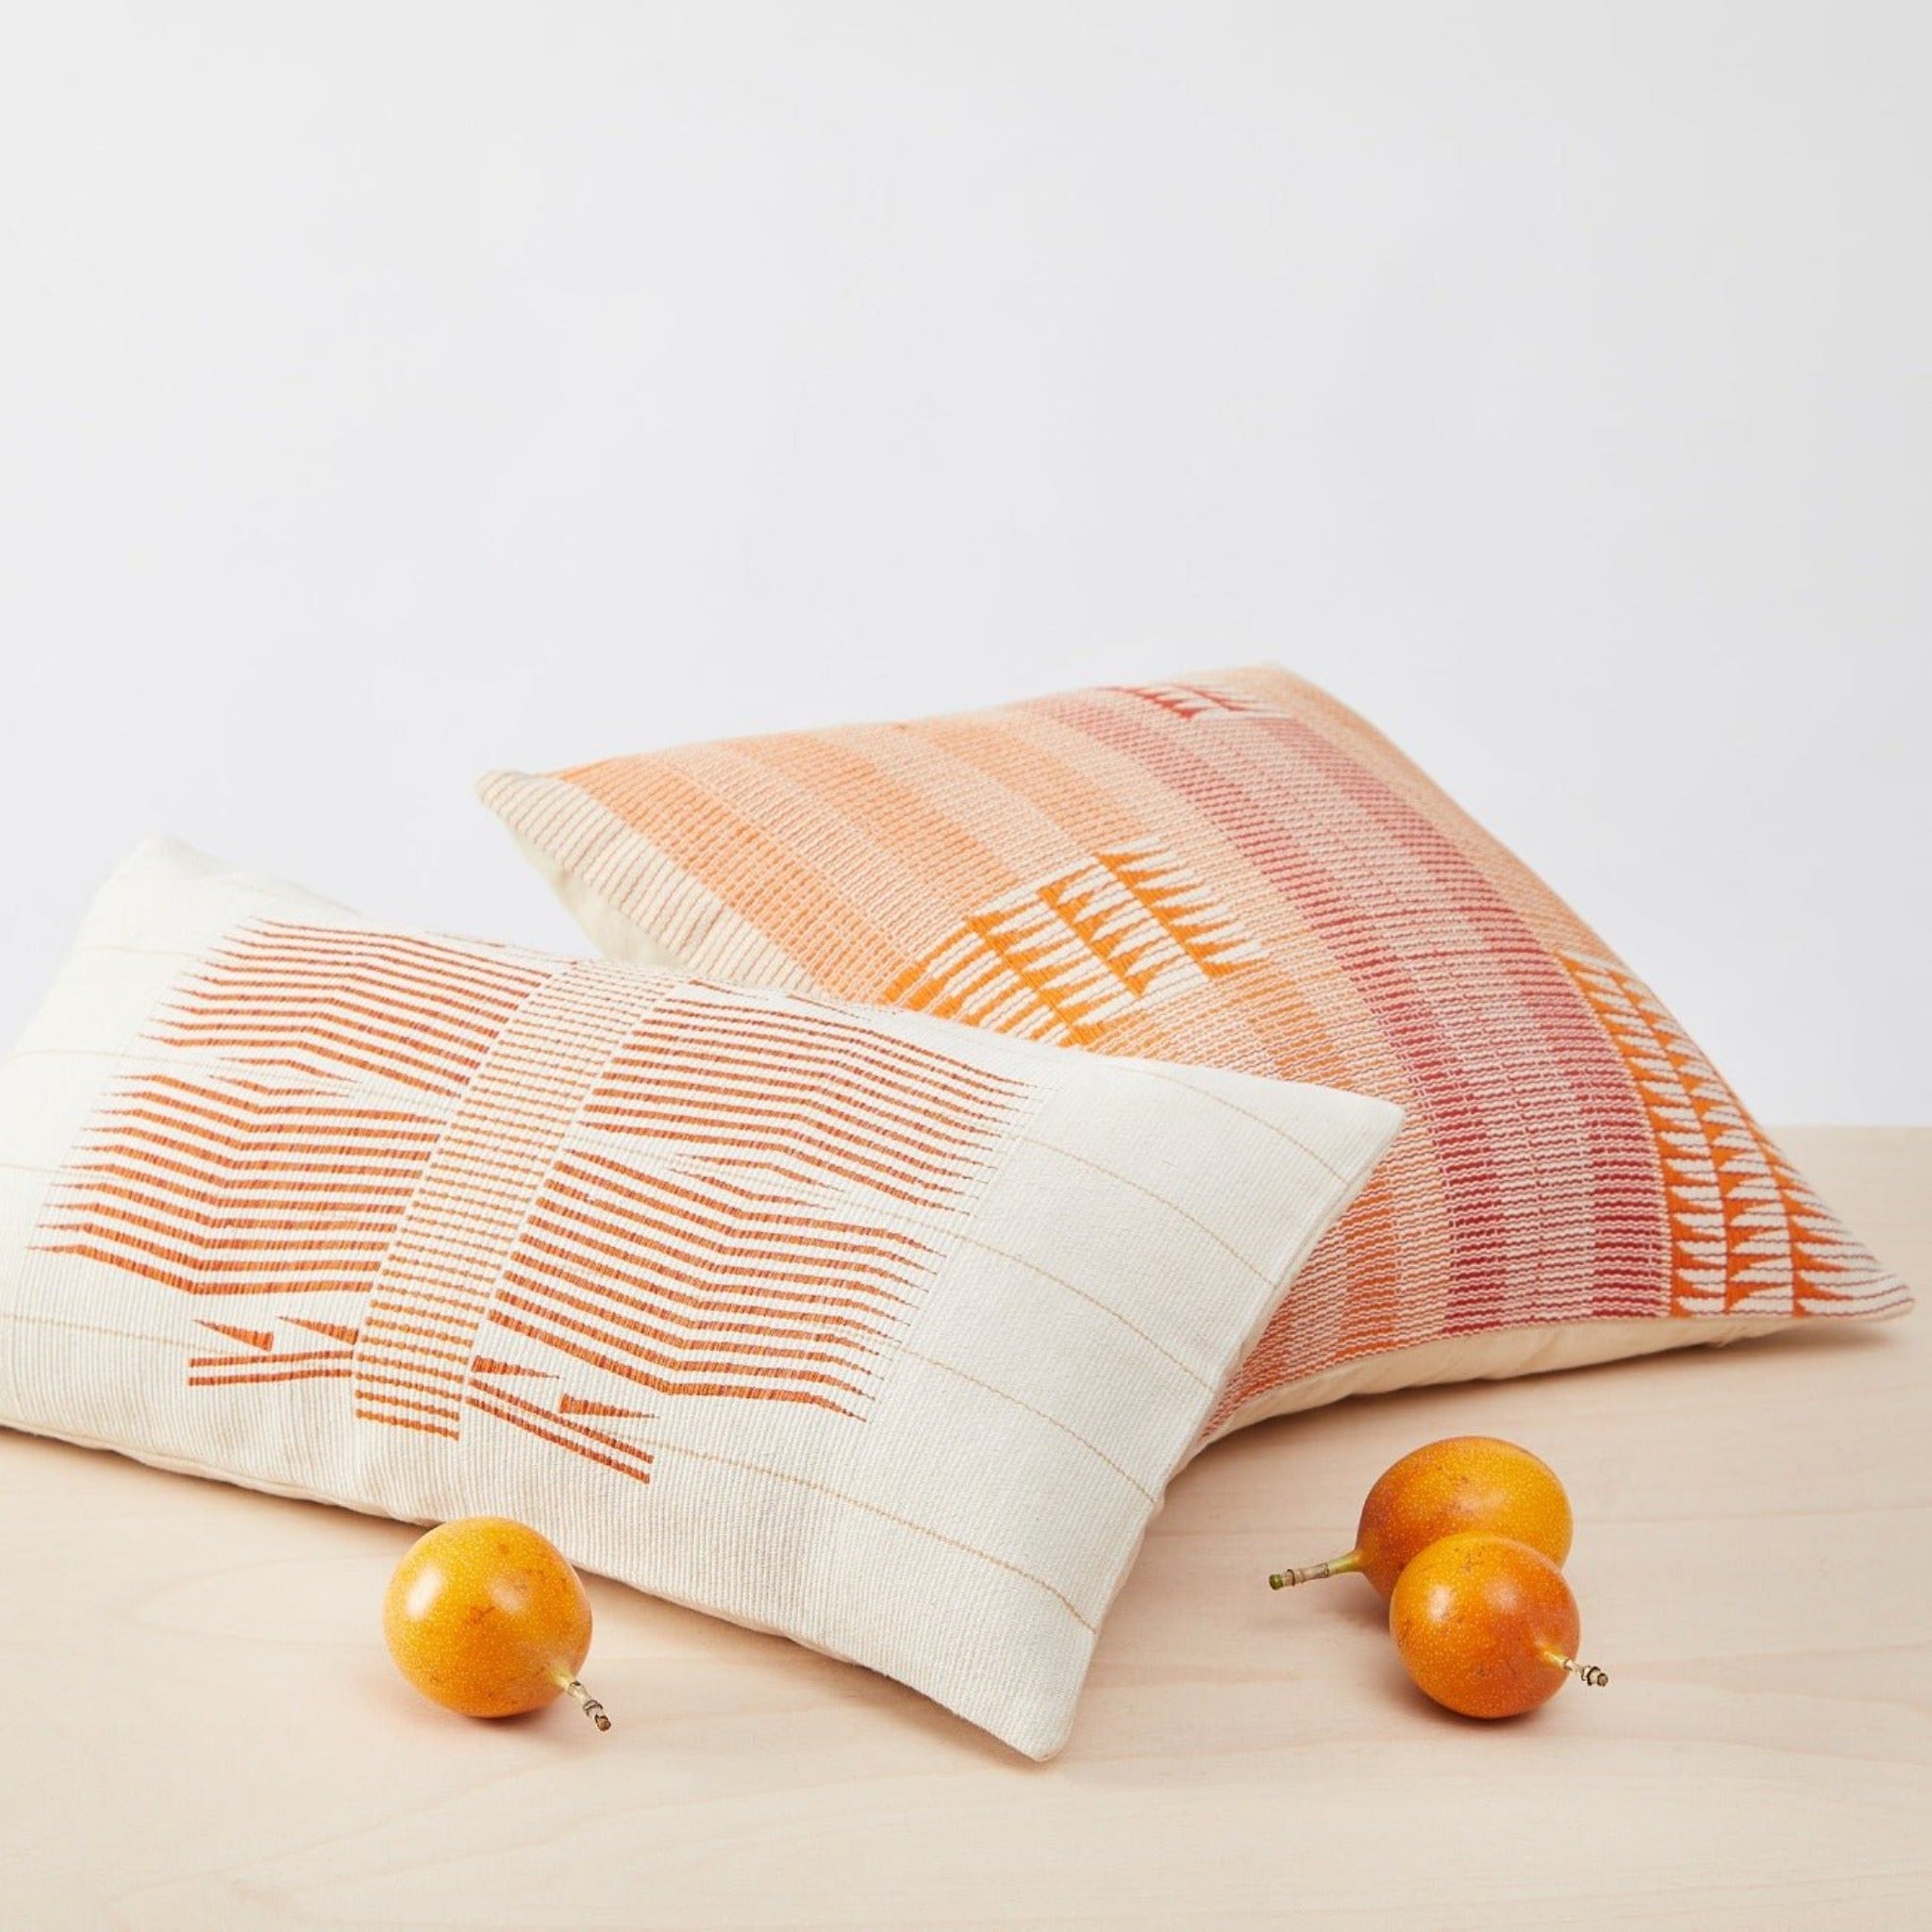 Two handwoven Nagaland cushions Aring Mood in orange, red and natural white